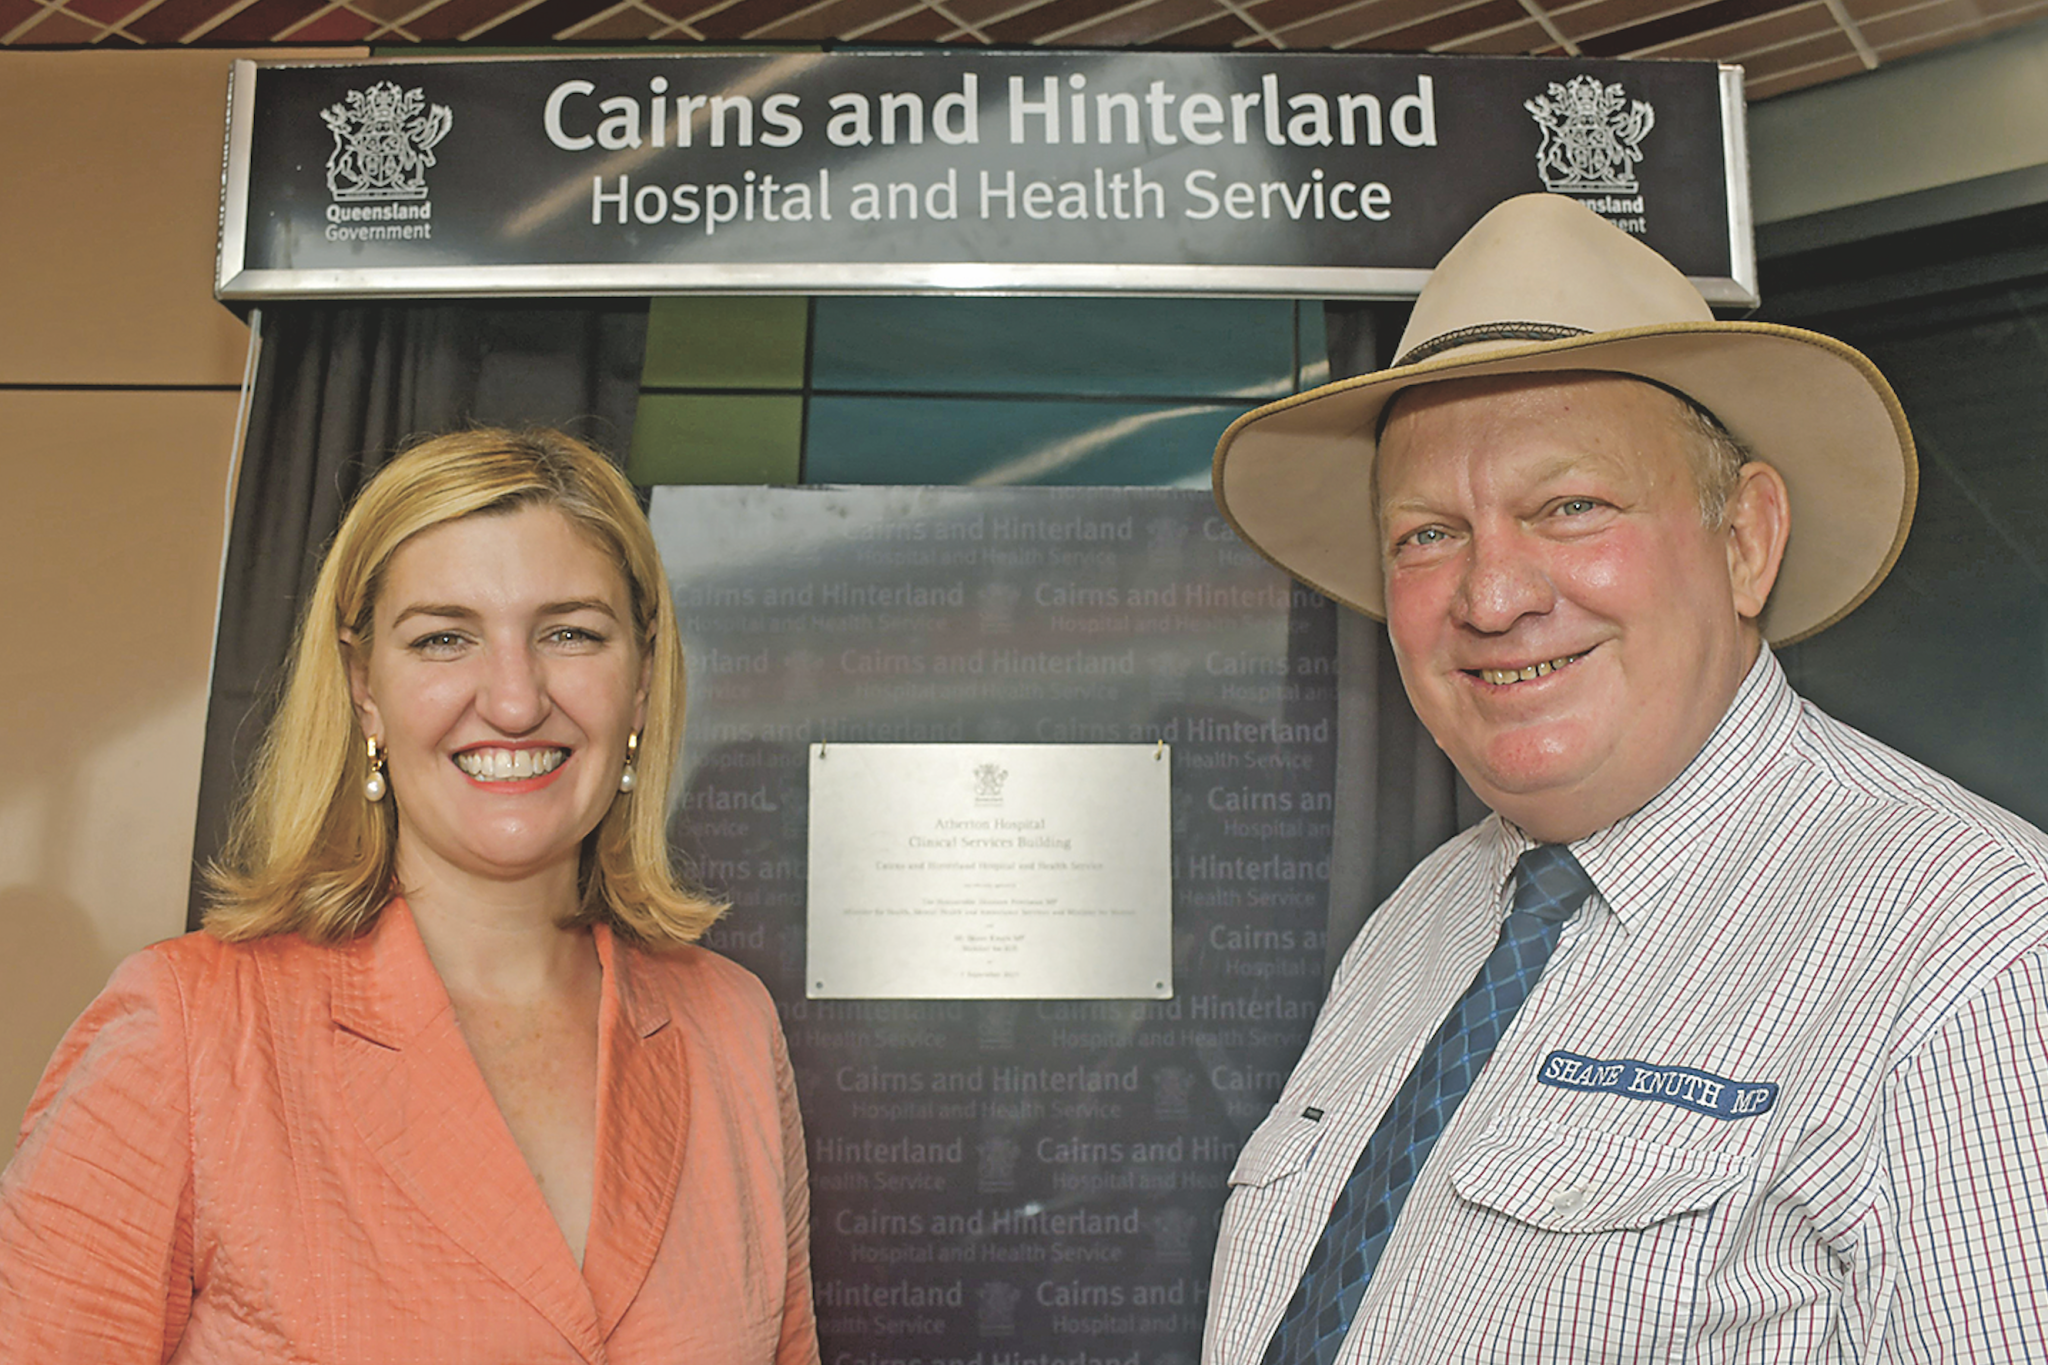 Officially open: shannon Fentiman MP Minister for Health and Shane Knuth MP at the official opening of the new Atherton Hospital last week